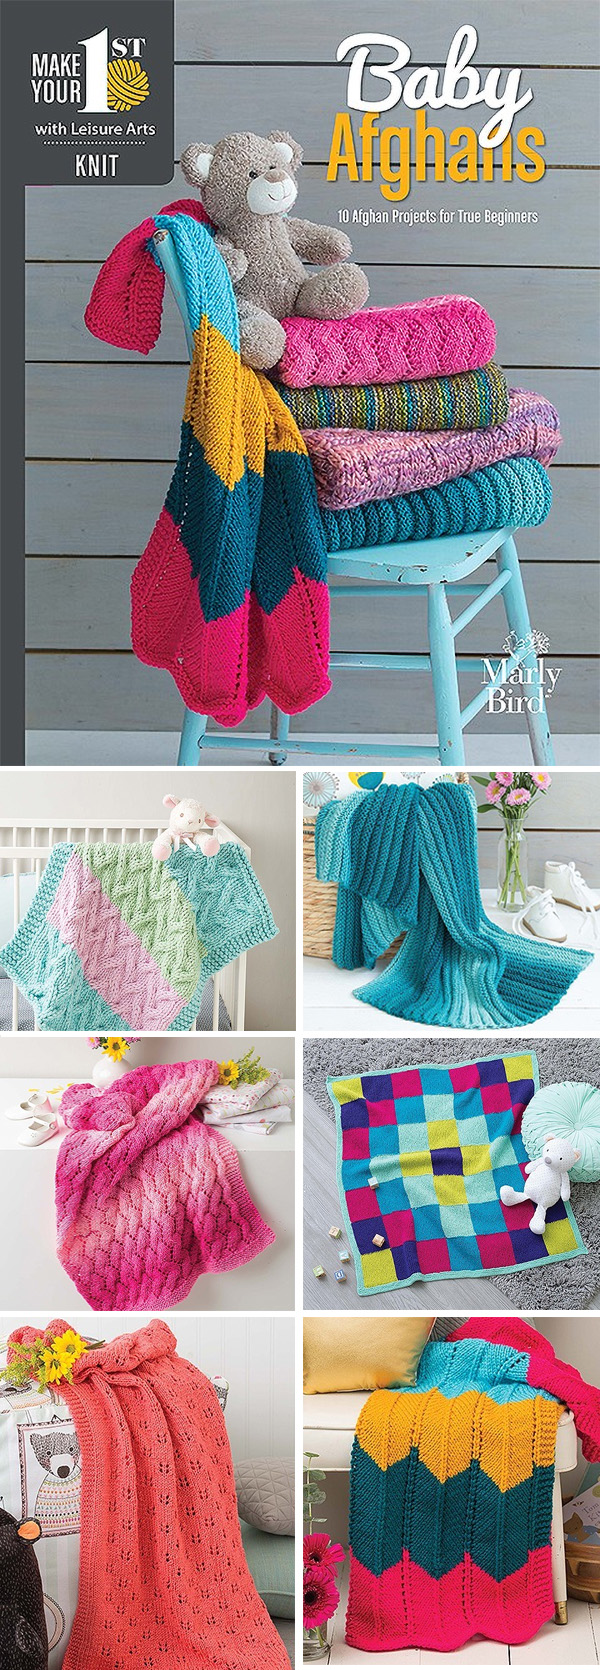 Make Your First Knit Baby Afghans - 10 Afghan Projects for True Beginners